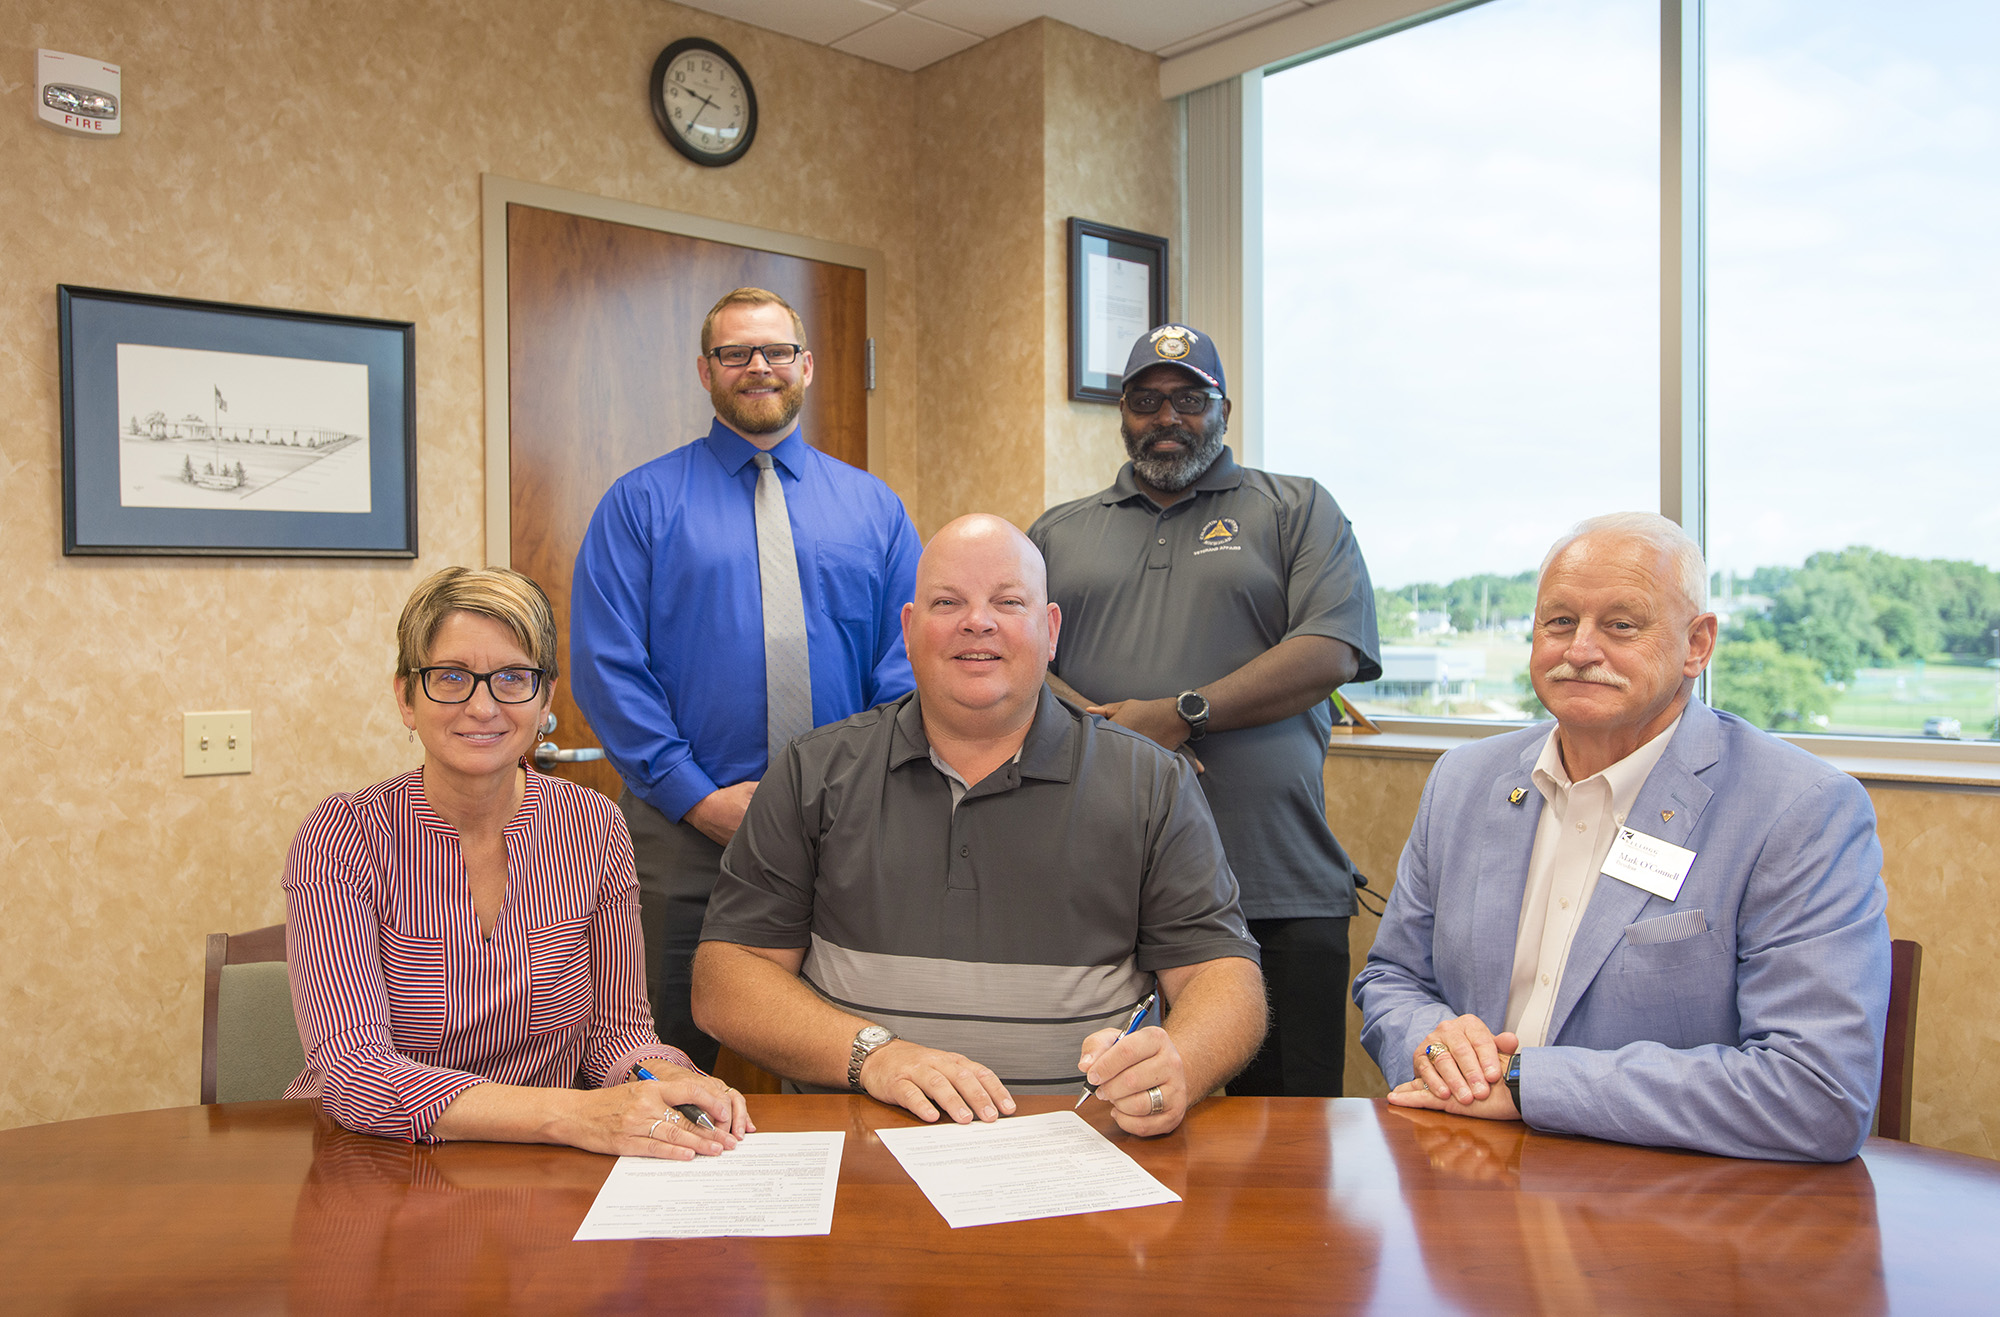 Pictured in the front row, from left to right, are KCC Foundation Director Teresa Durham, Calhoun County Board Chair Derek King and KCC President Mark O’Connell. In the back row, from left to right, are Calhoun County Veterans Affairs Director Aaron Edlefson and Committee Chairperson Sam Gray.